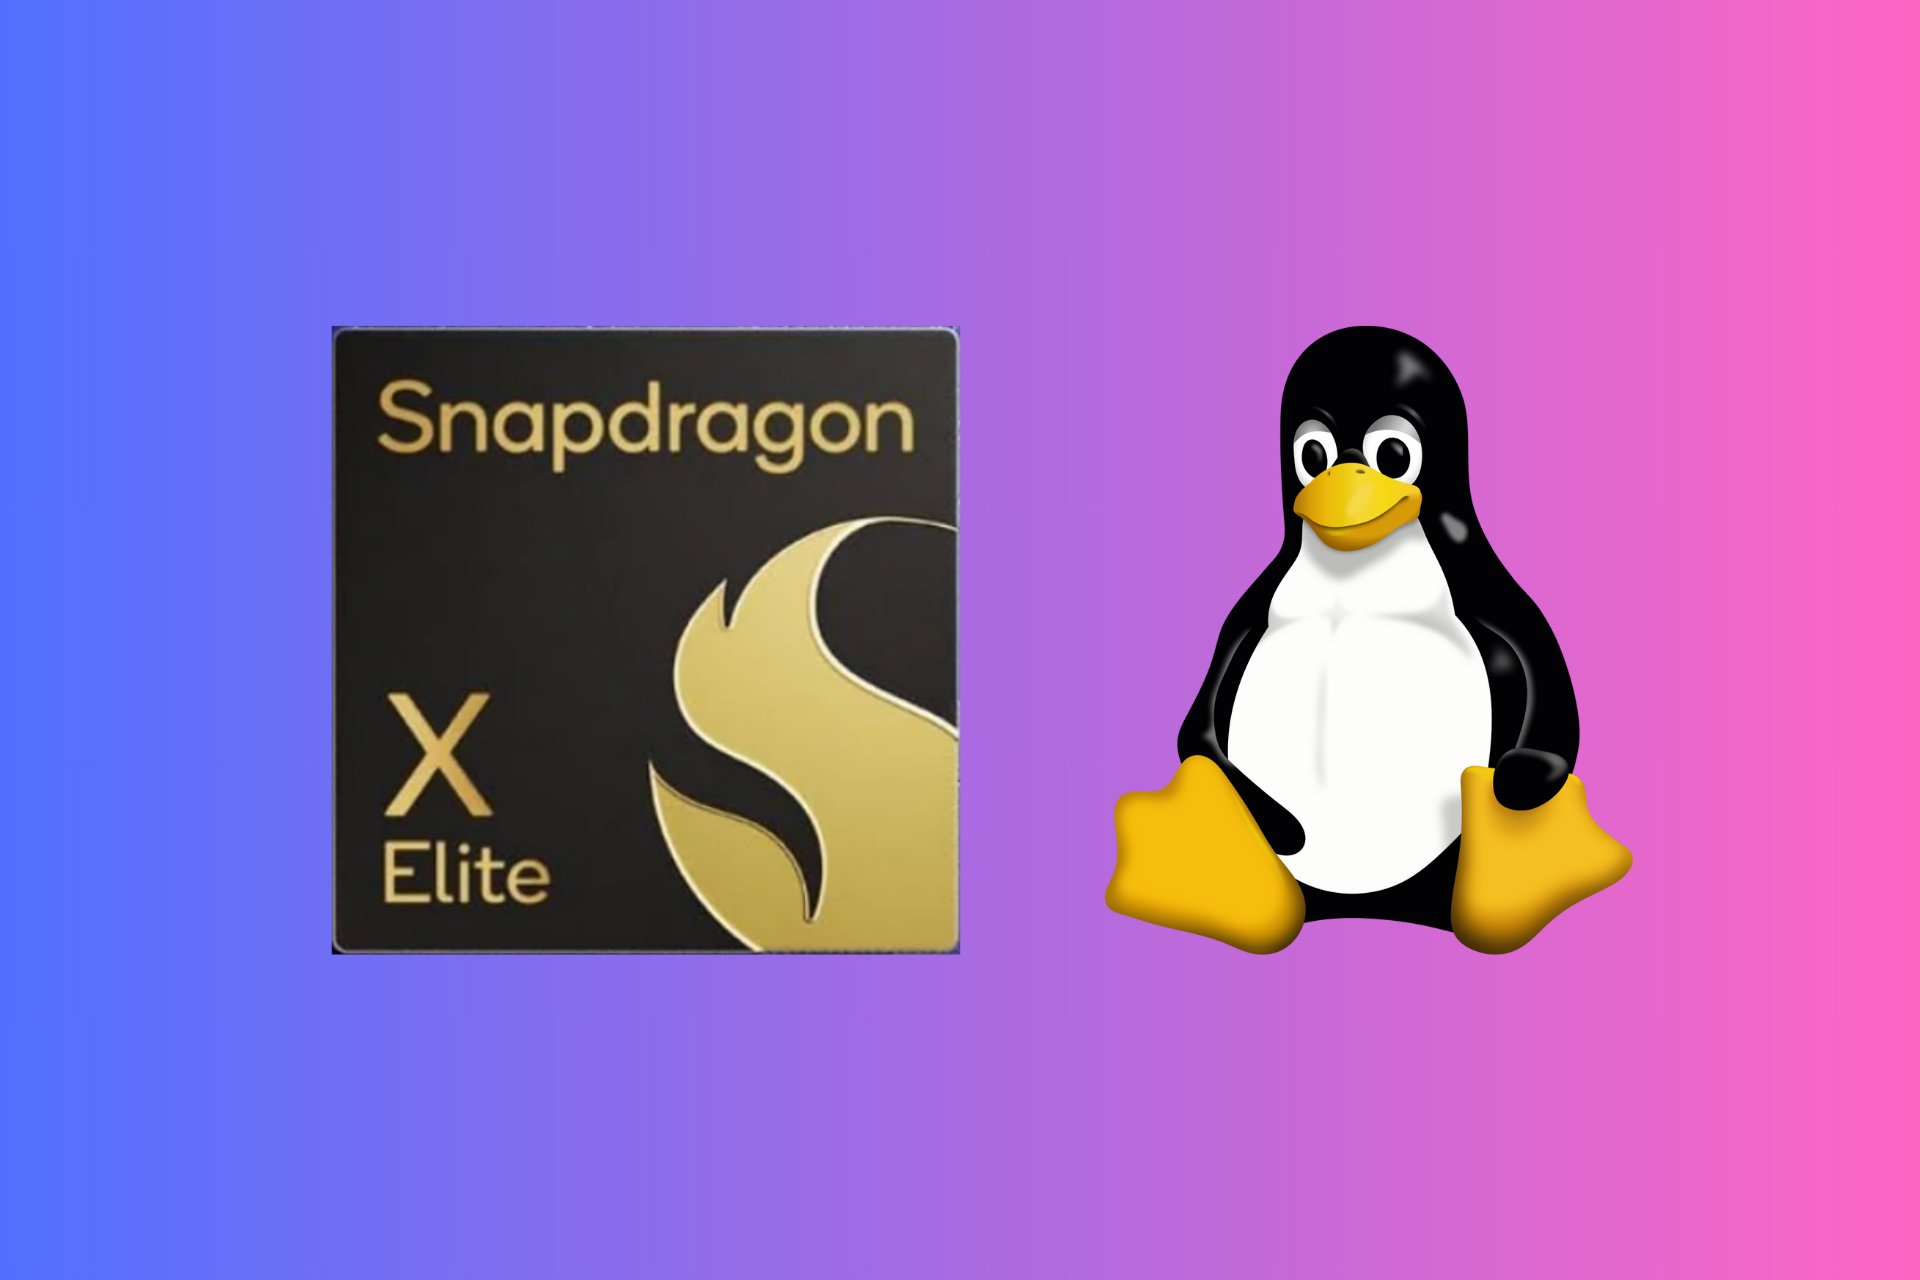 Snapdragon X Elite on Linux: How Does it Work?